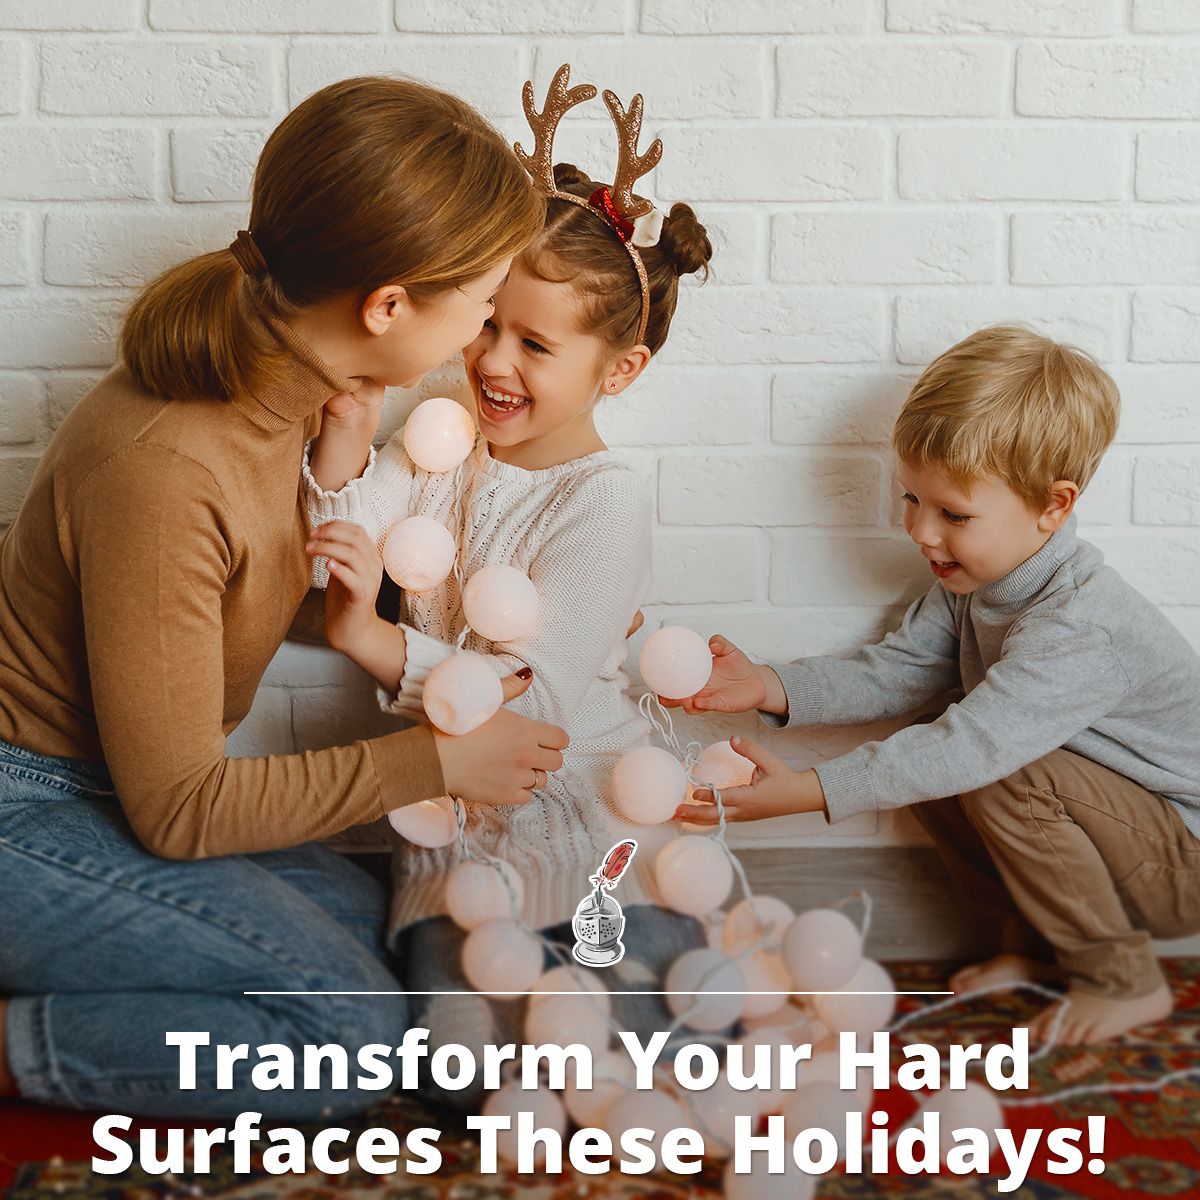 Transform Your Hard Surfaces These Holidays!